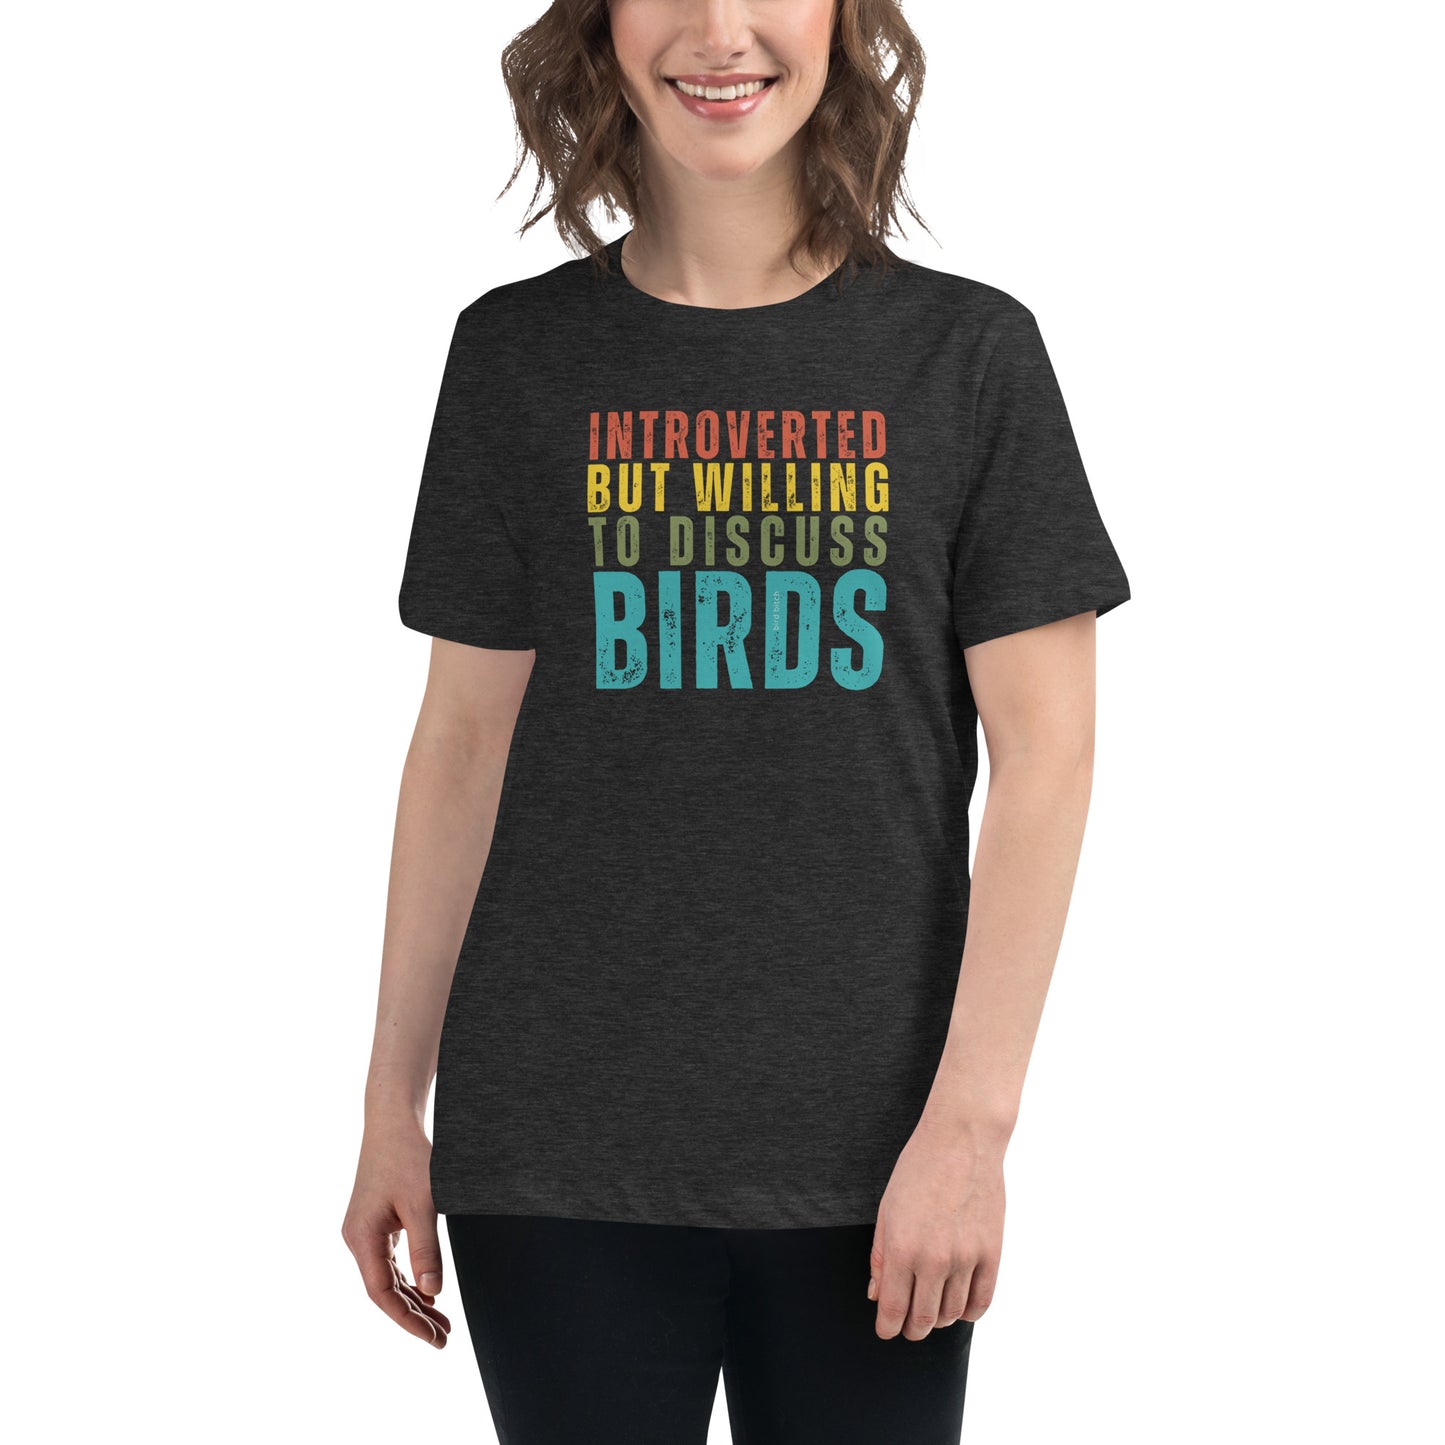 Best Bird Gifts for Her